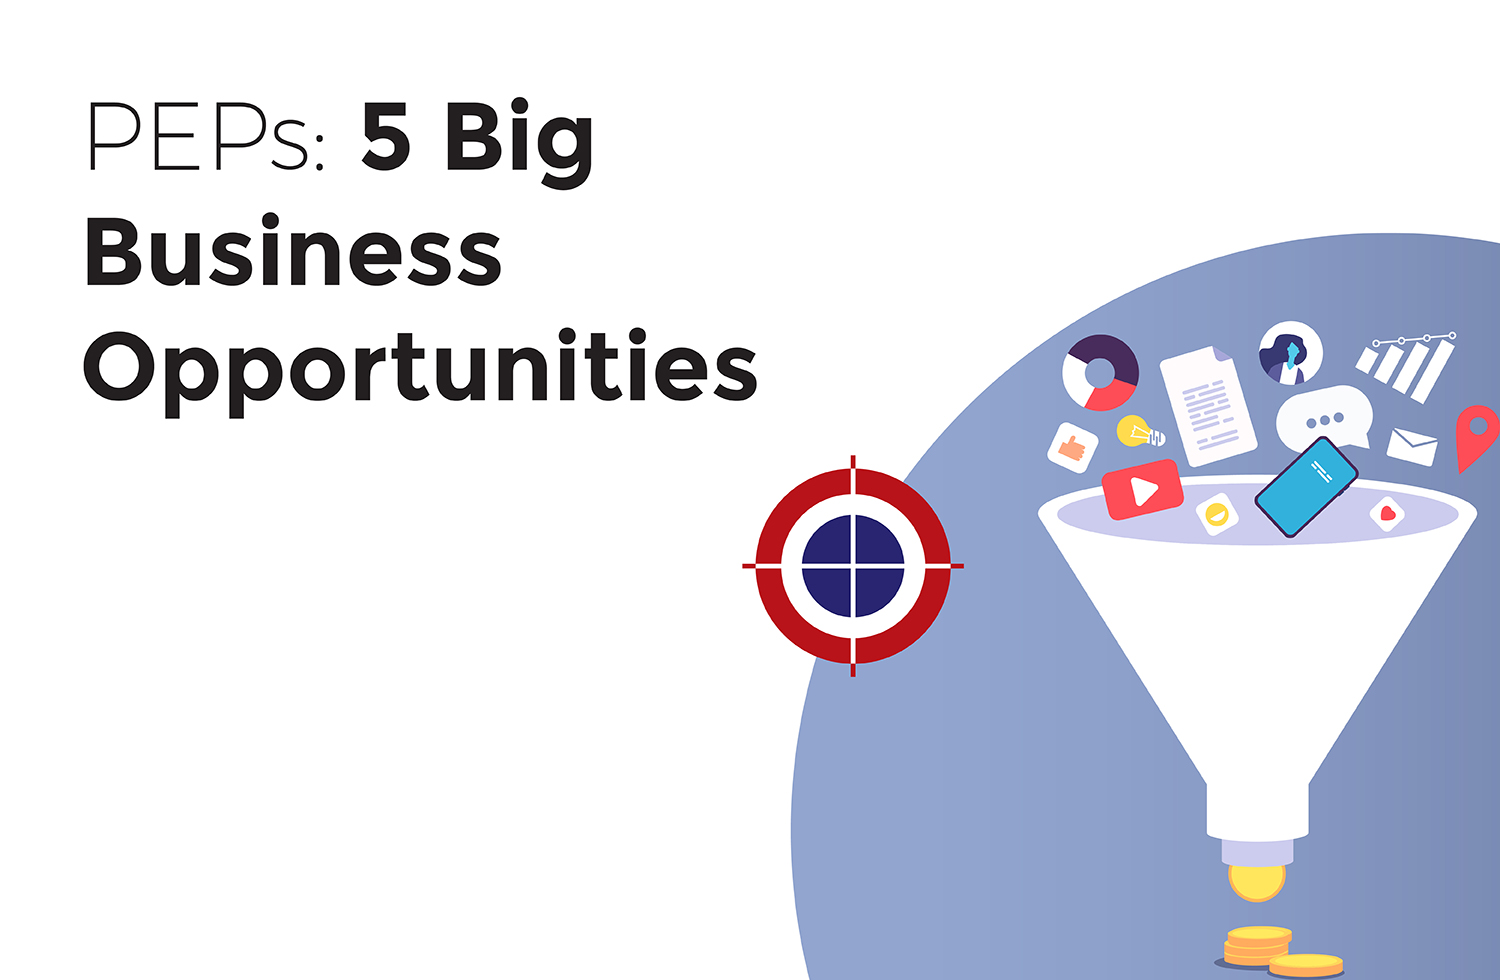 Pooled Employer Plans (PEPs): 5 big business opportunities